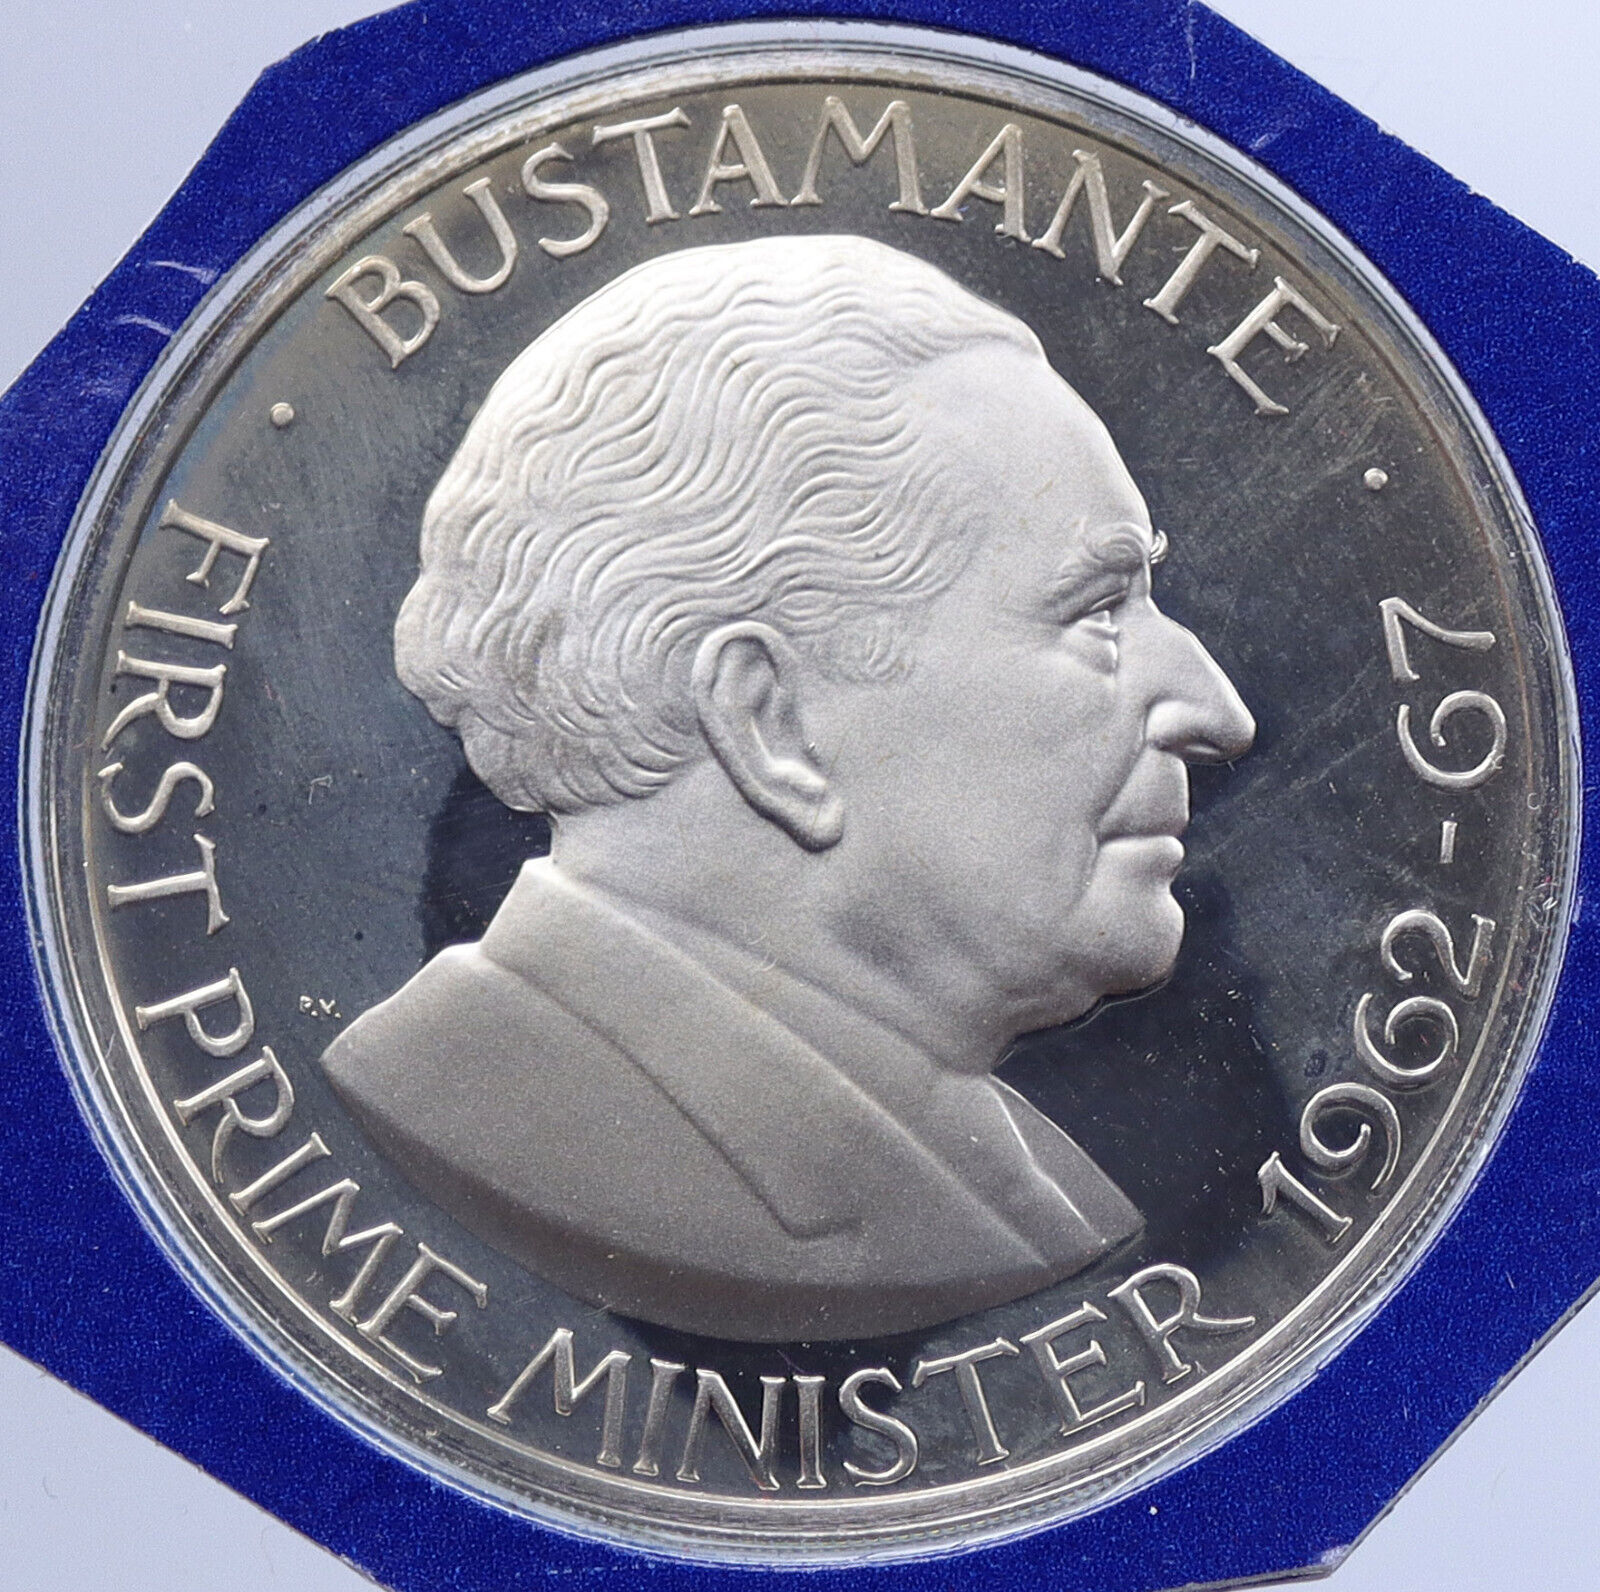 1978 JAMAICA First Prime Minister BUSTAMANTE Vintage Proof Dollar Coin i119314